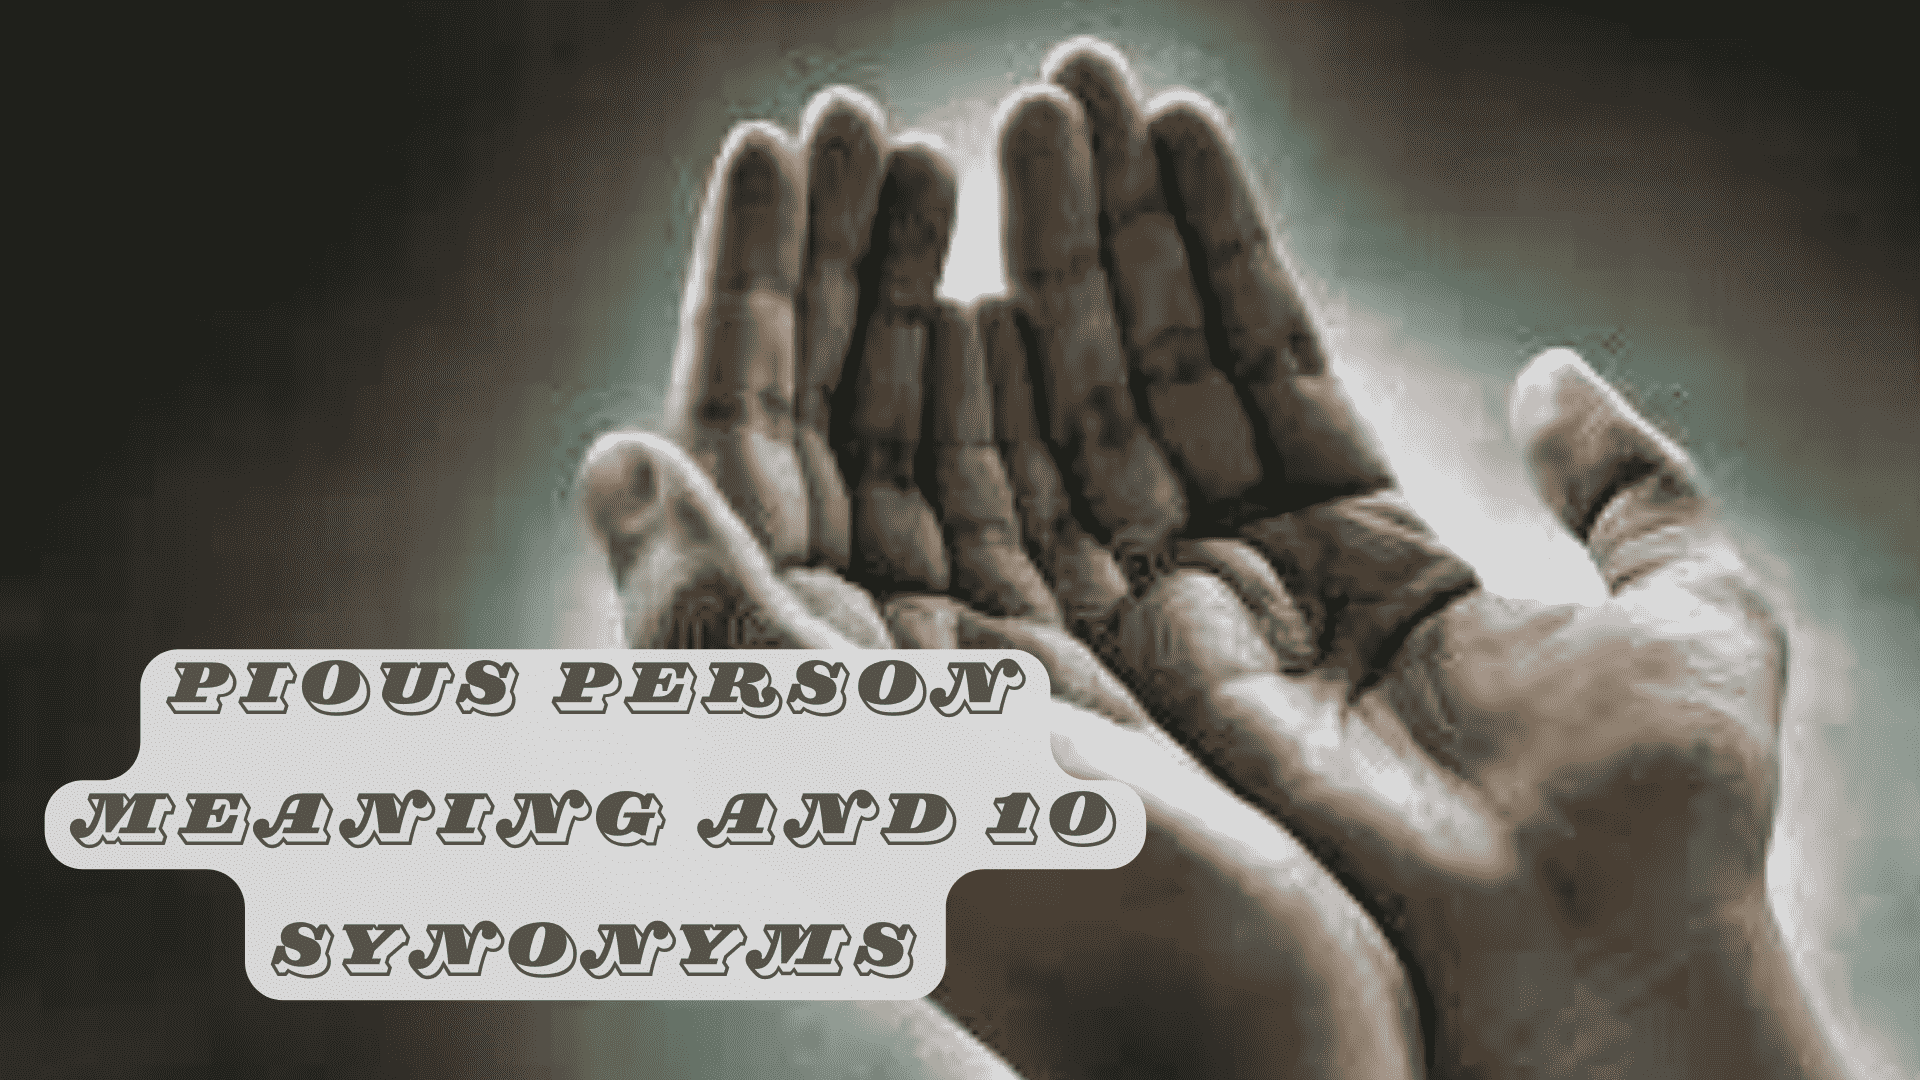 Pious person meaning and 10 synonyms